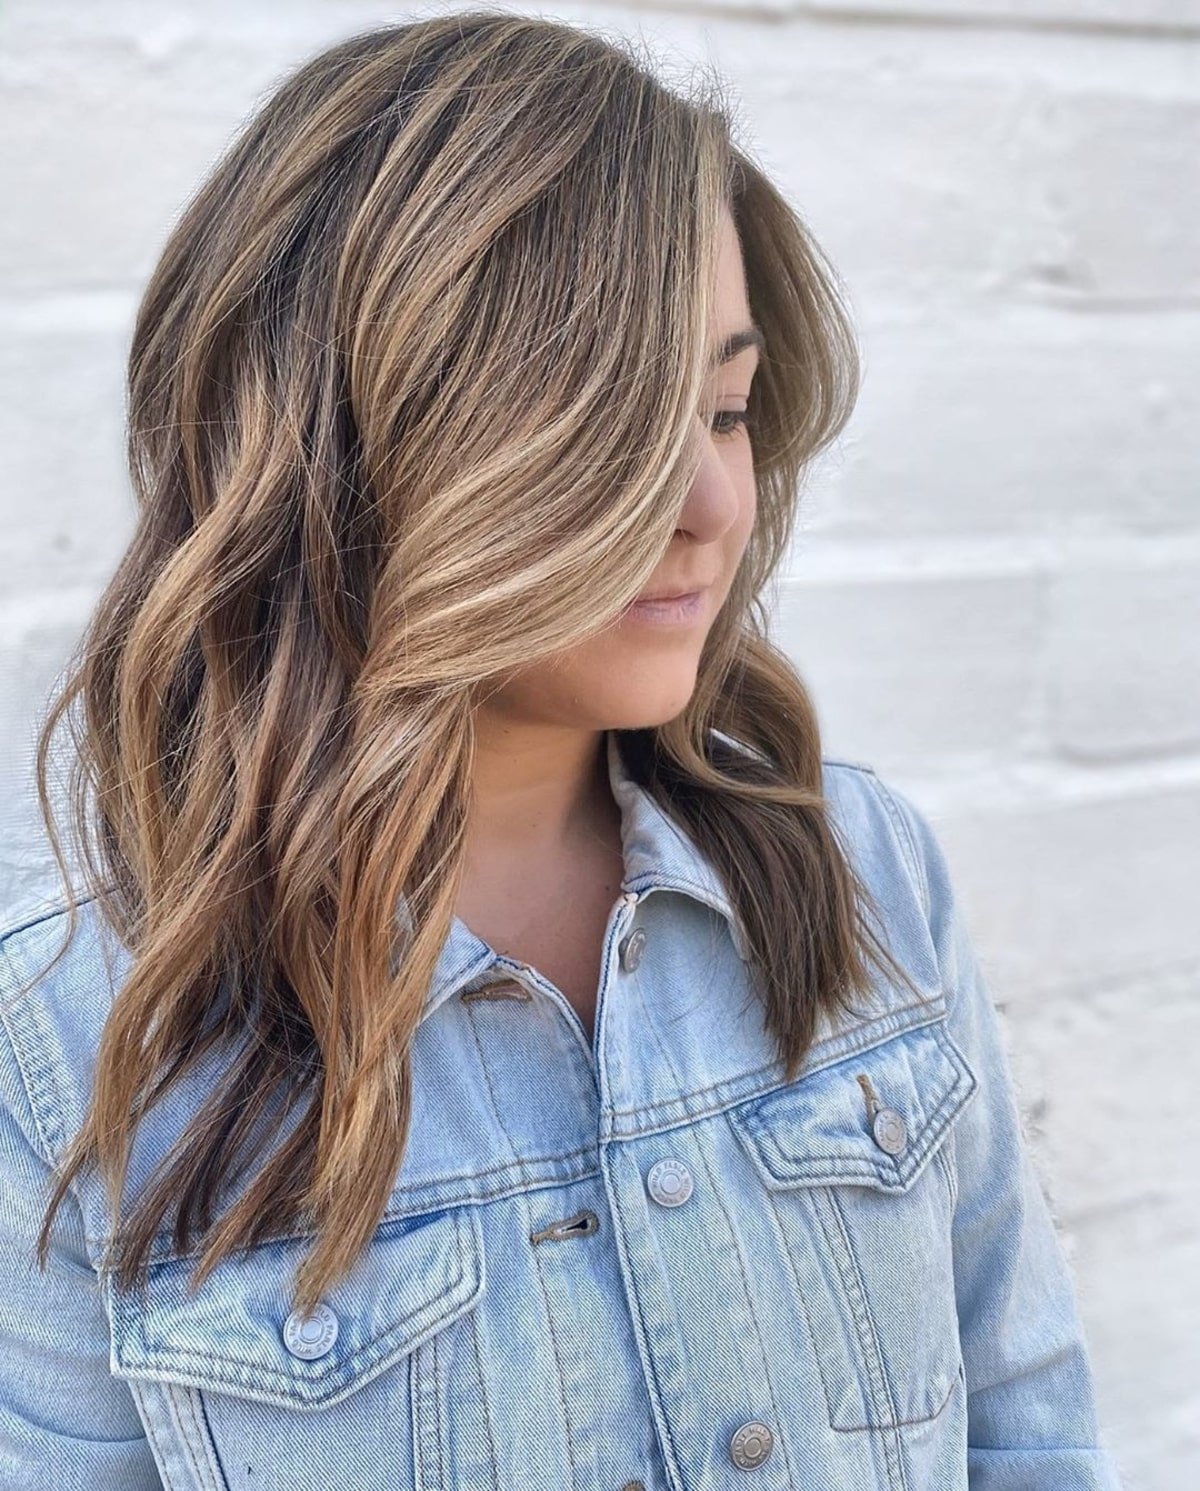 15 Pictures of Partial Highlights That Are Simply Stunning